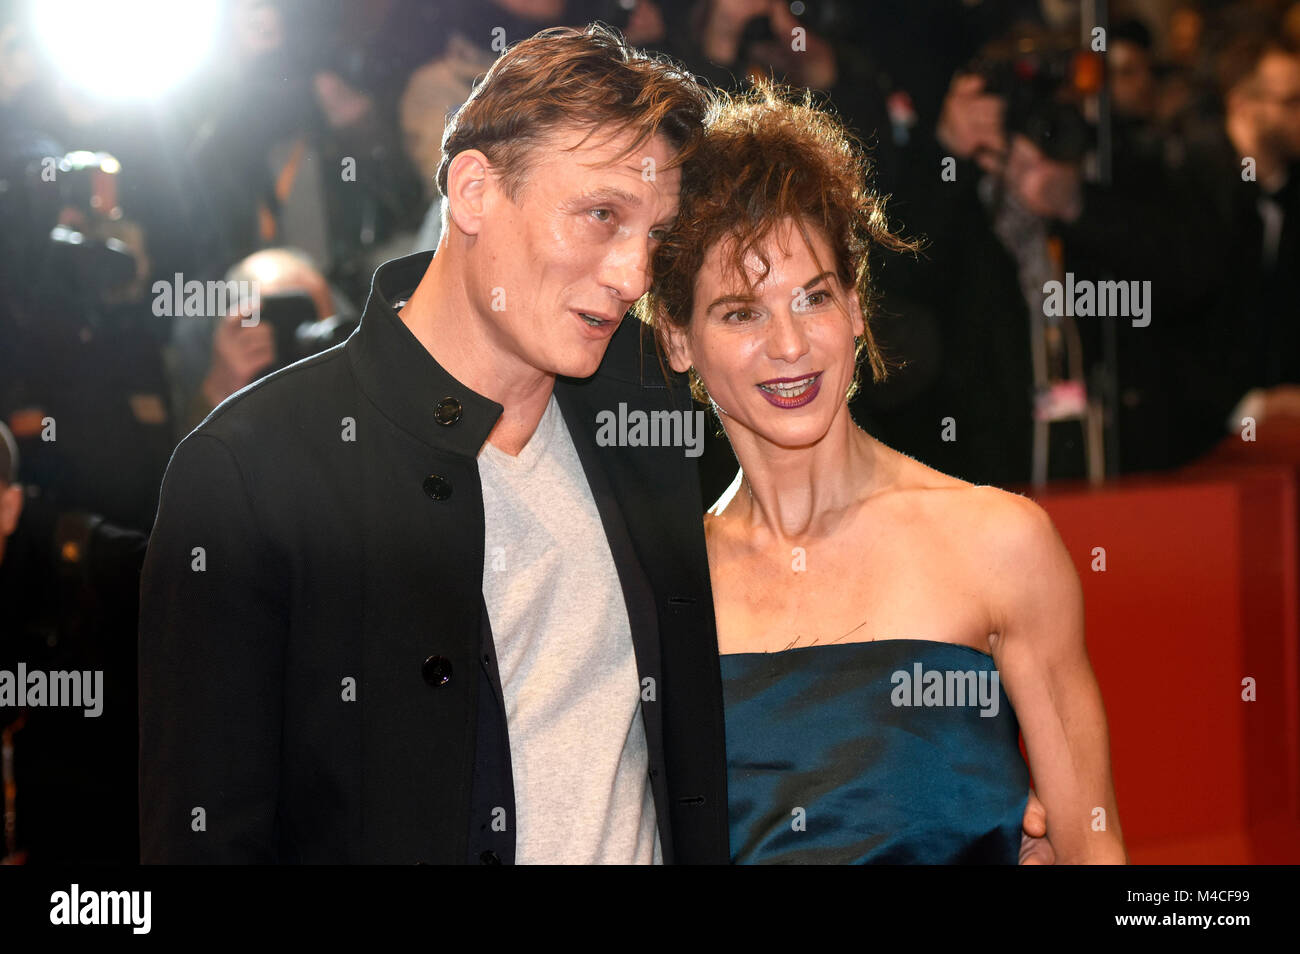 Berlin, Germany. 15th February, 2018. Oliver Masucci and Bibiana Beglau attending the 'Isle Of Dogs' premiere at the 68th Berlin International Film Festival / Berlinale 2018 at Berlinale Palast on February 15, 2018 in Berlin, Germany. Credit: Geisler-Fotopress/Alamy Live News Stock Photo